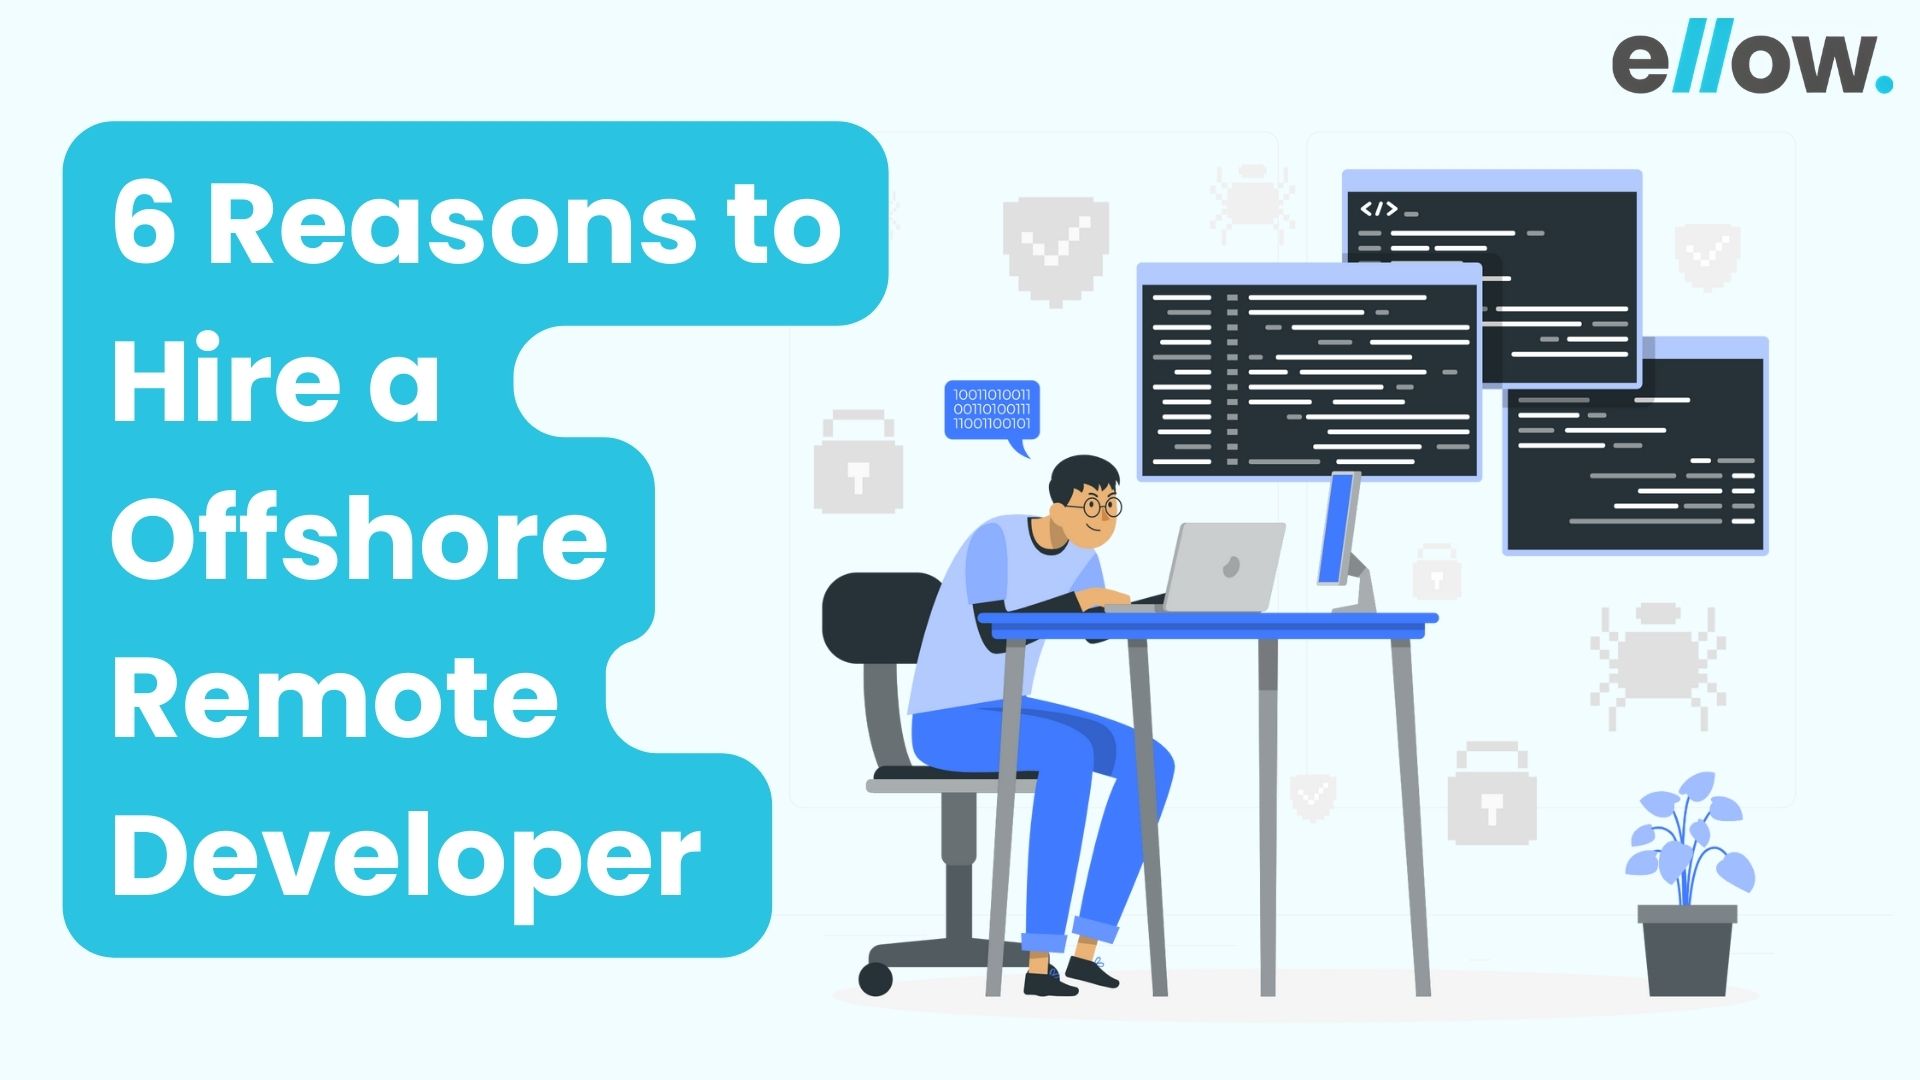 6 Reasons to Hire a Offshore Remote Developer